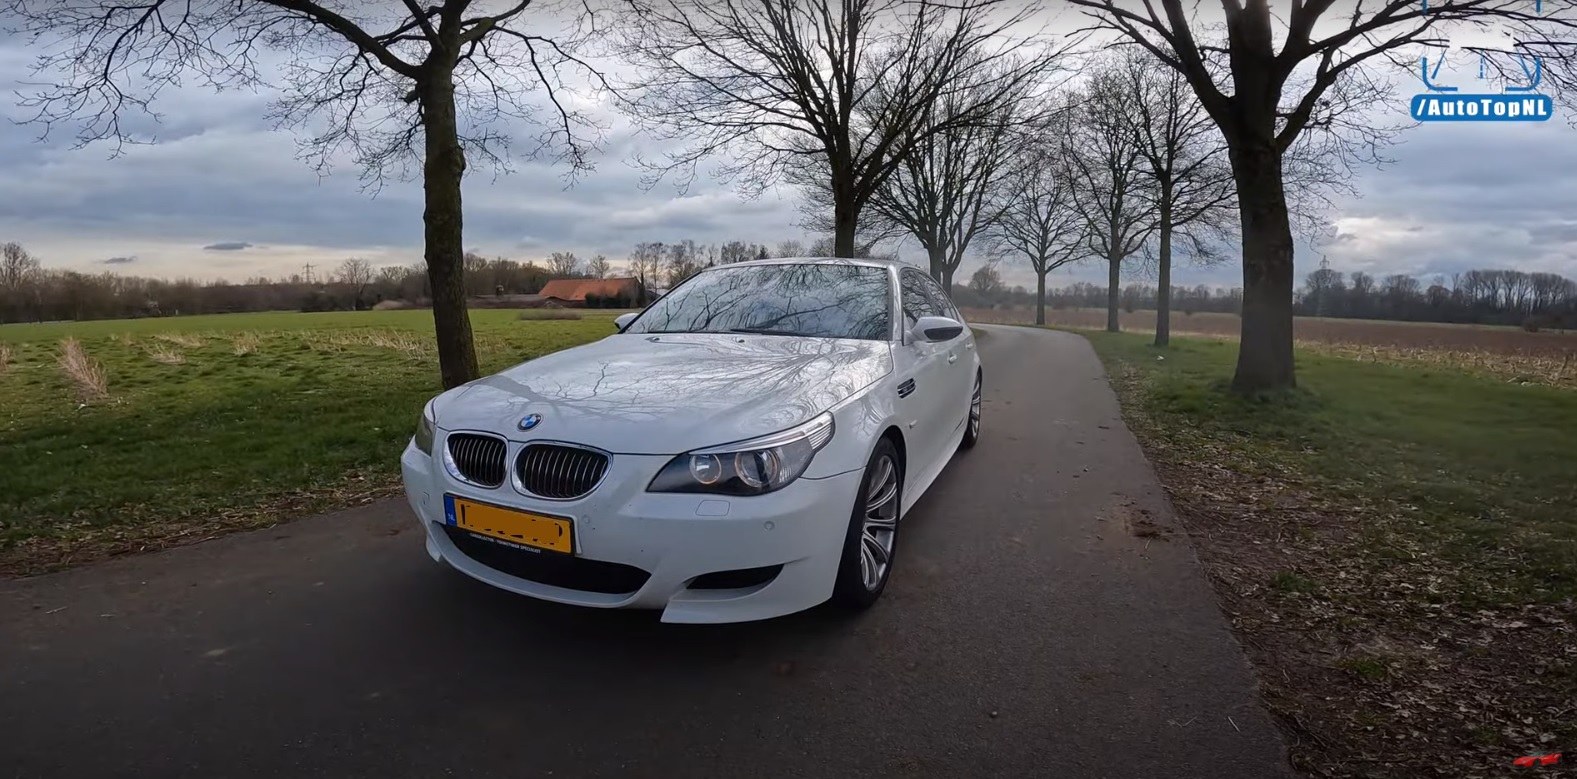 2005 BMW E60 ///M5 - The Last Naturally Aspirated M5